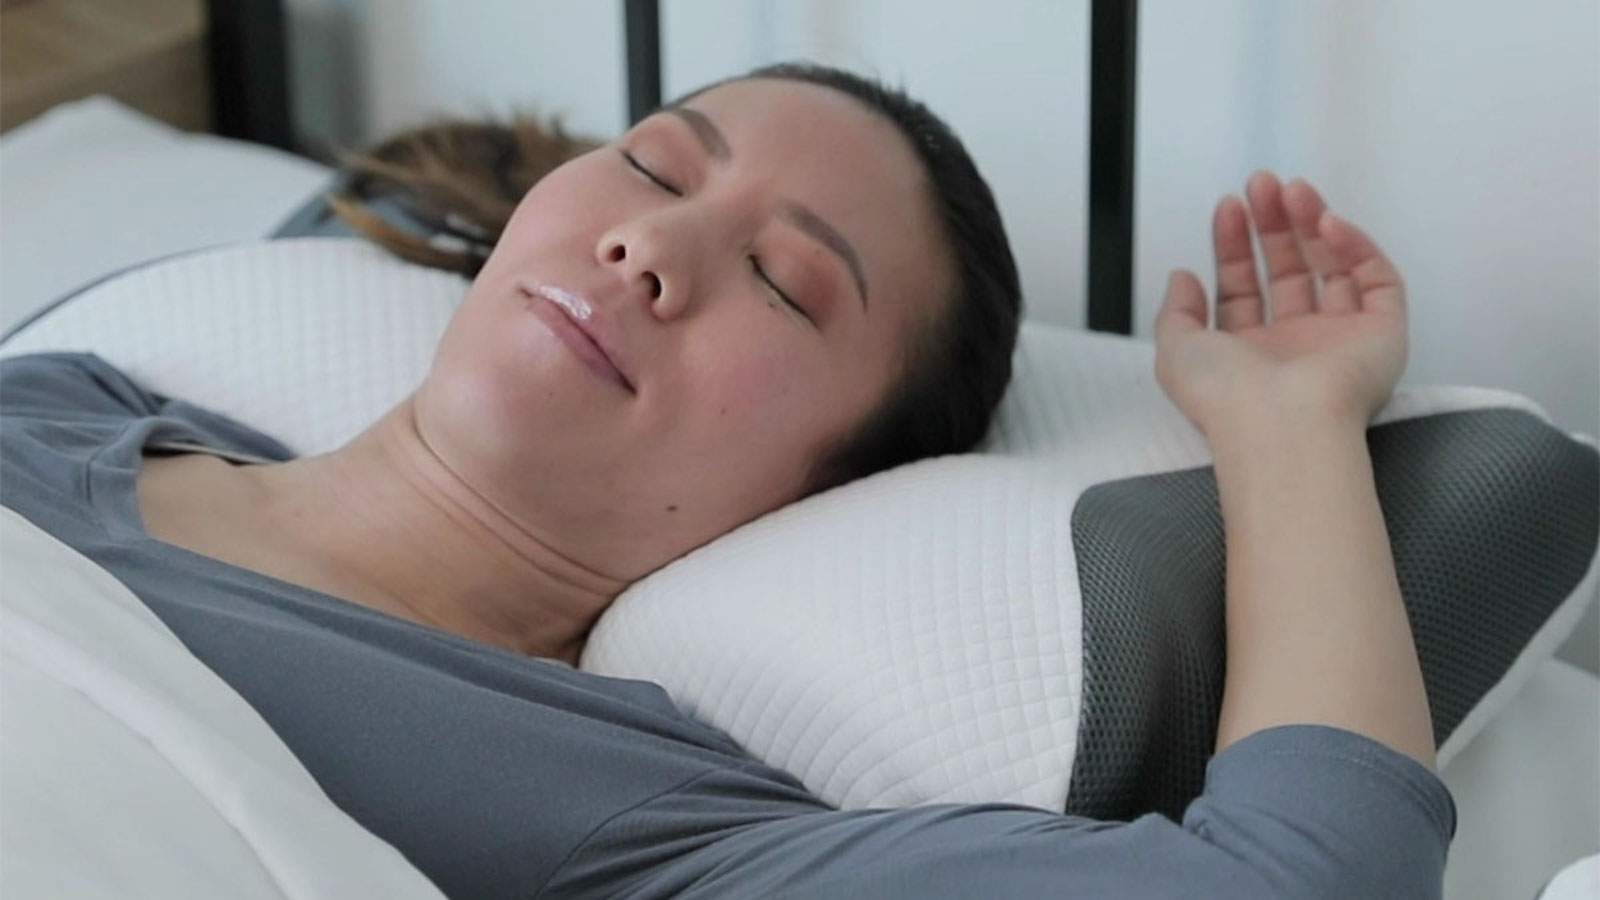 Here’s how you could get paid $3,000 to sleep